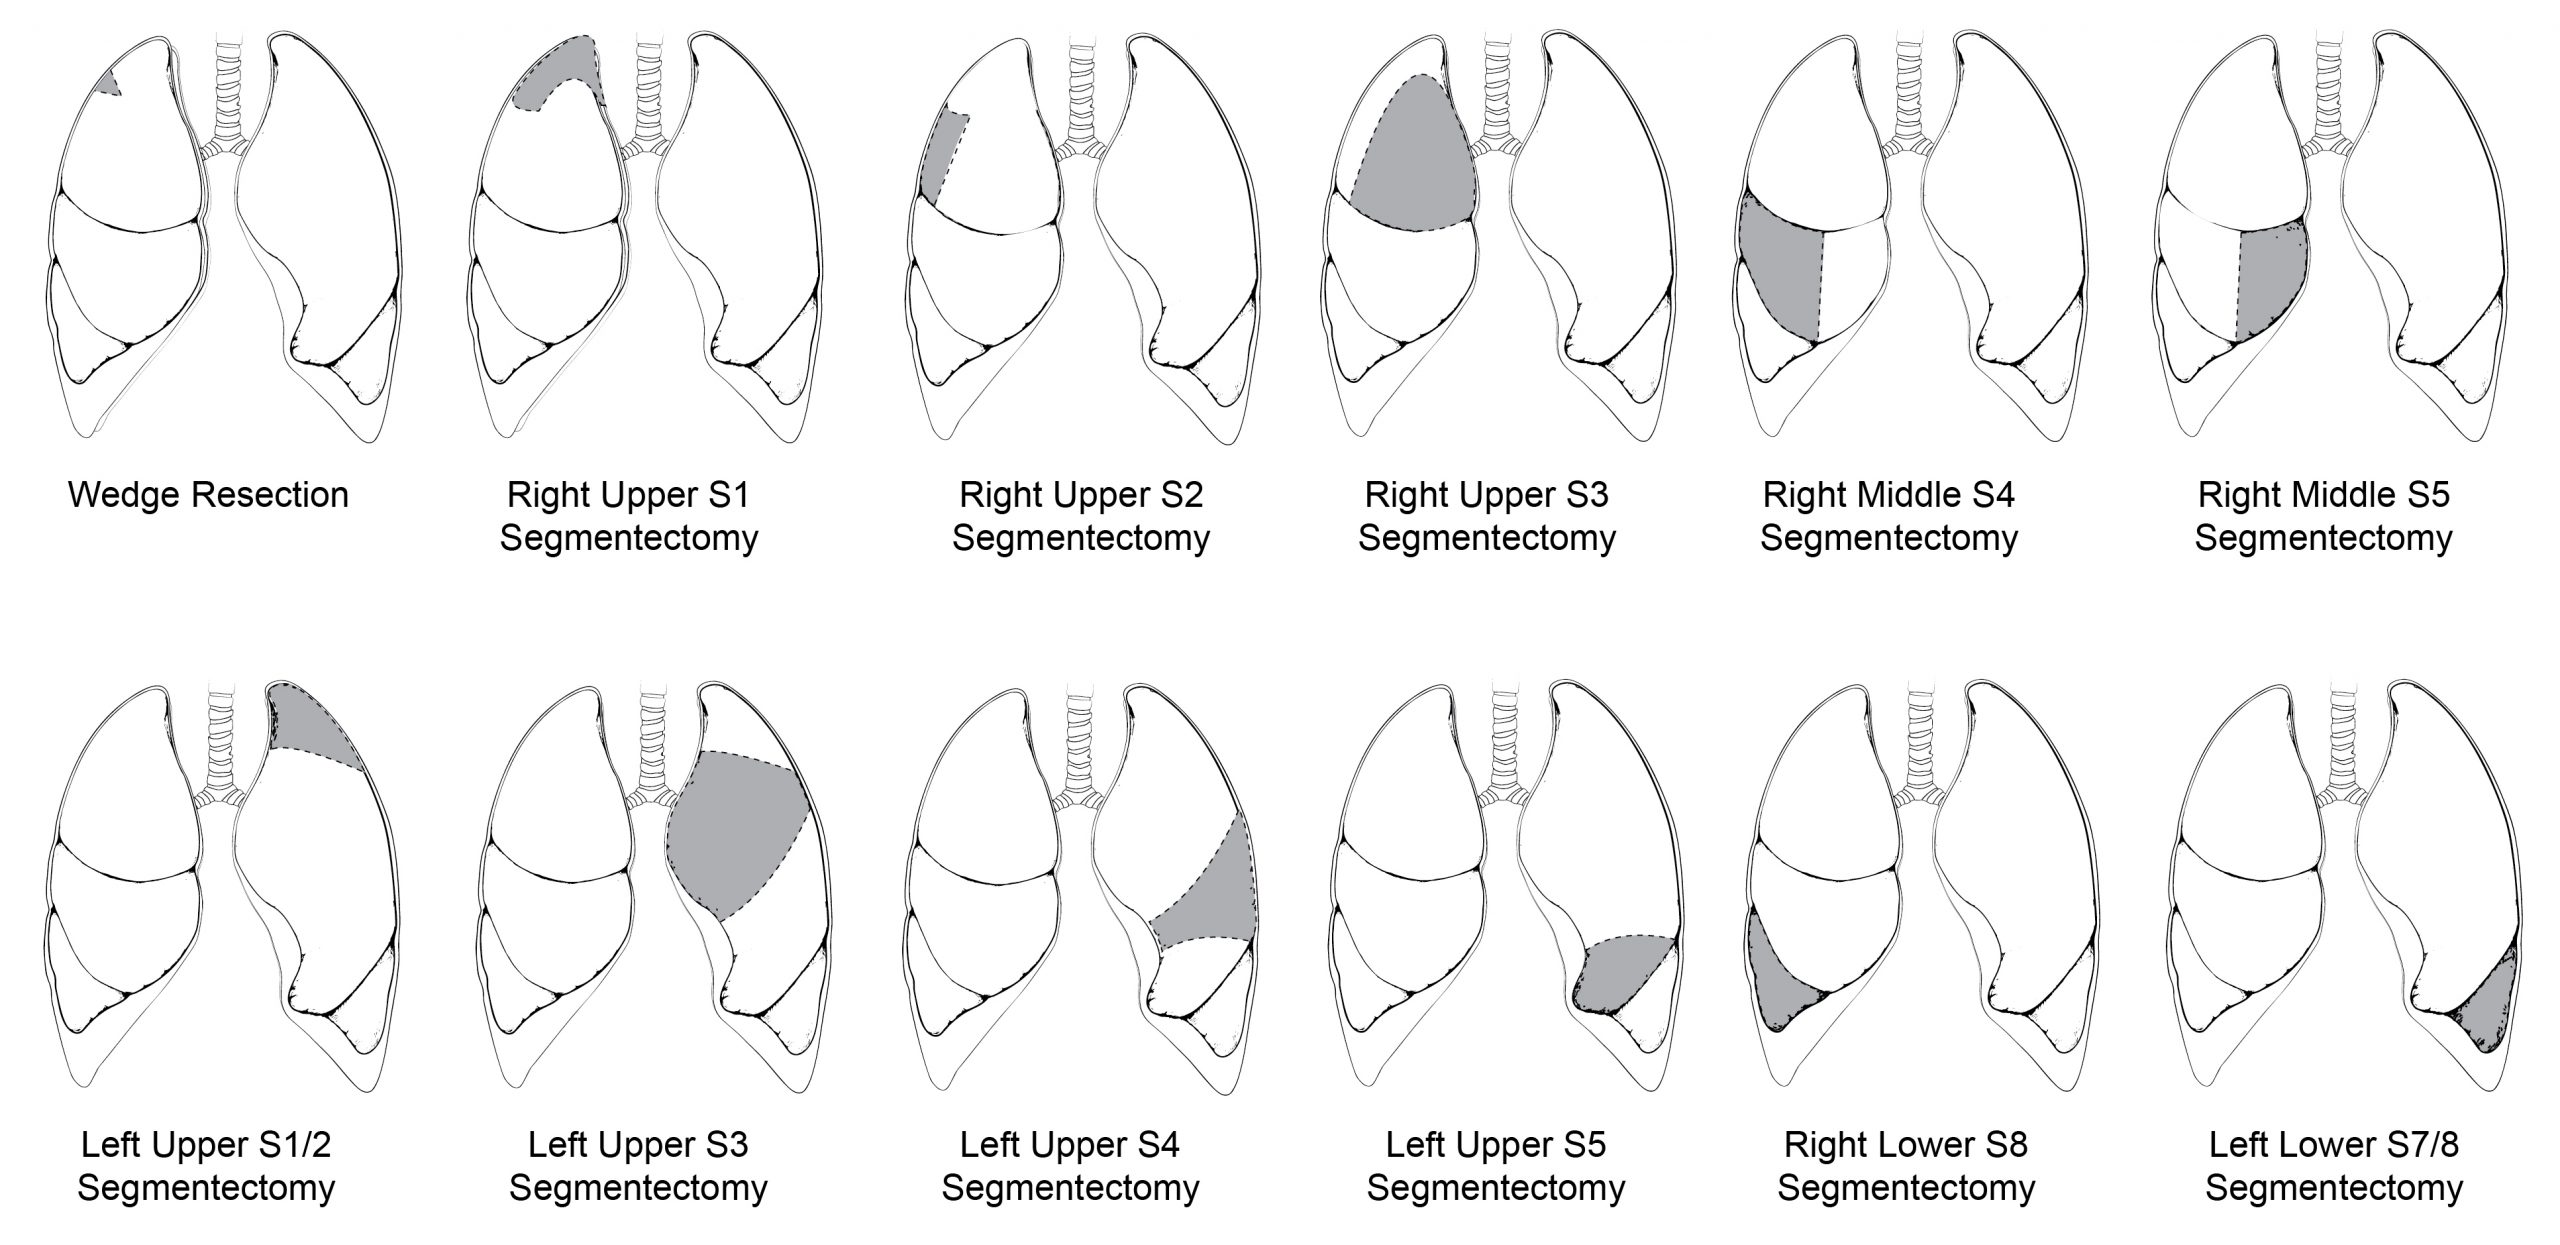 Illustration of 12 lungs showing different segmentectomy regions